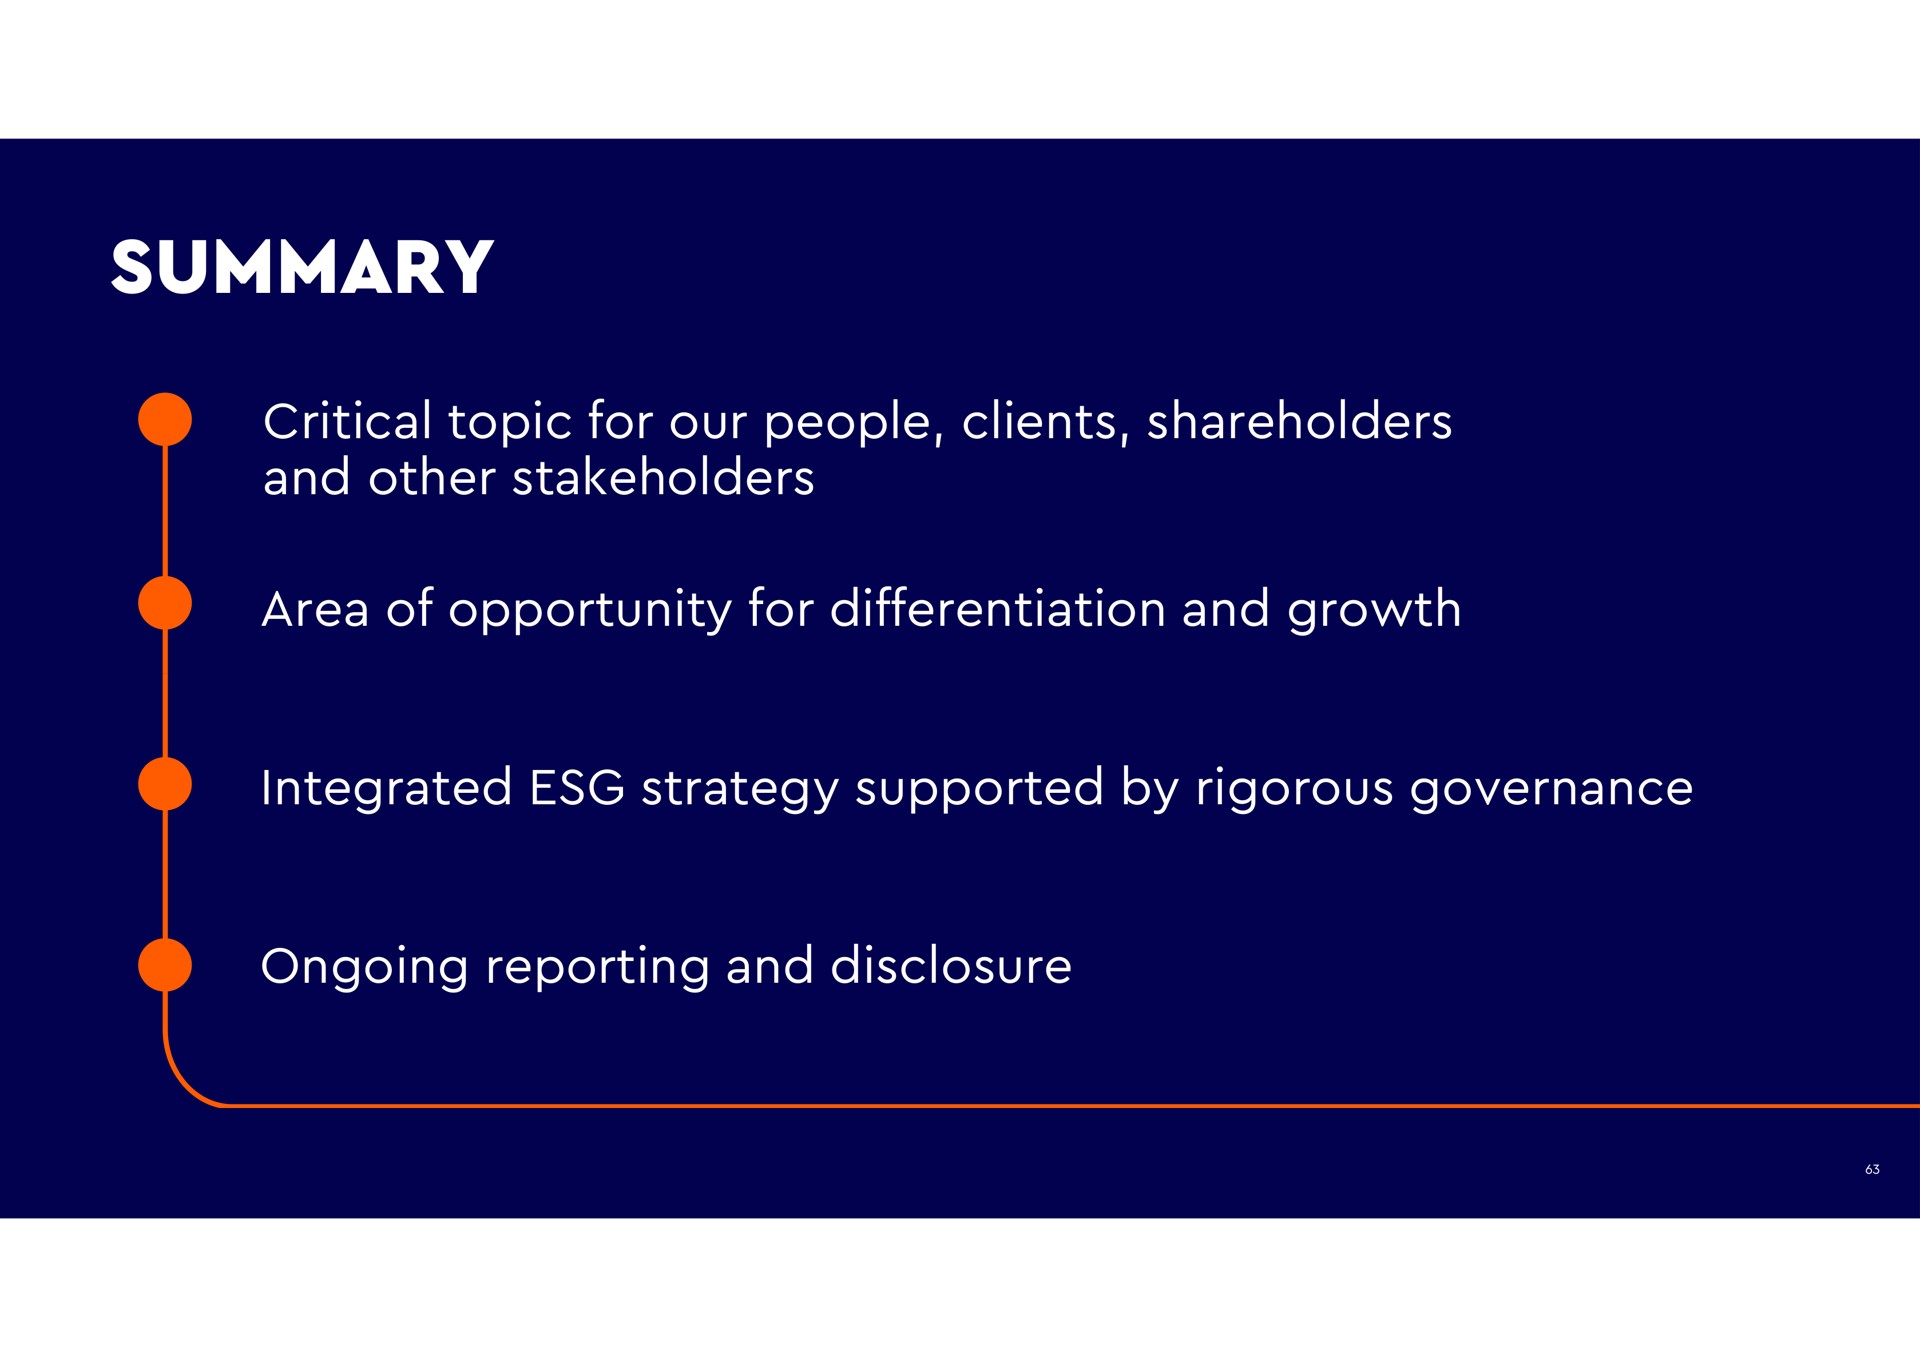 summary critical topic for our people clients shareholders and other stakeholders area of opportunity for differentiation and growth integrated strategy supported by rigorous governance ongoing reporting and disclosure | WPP